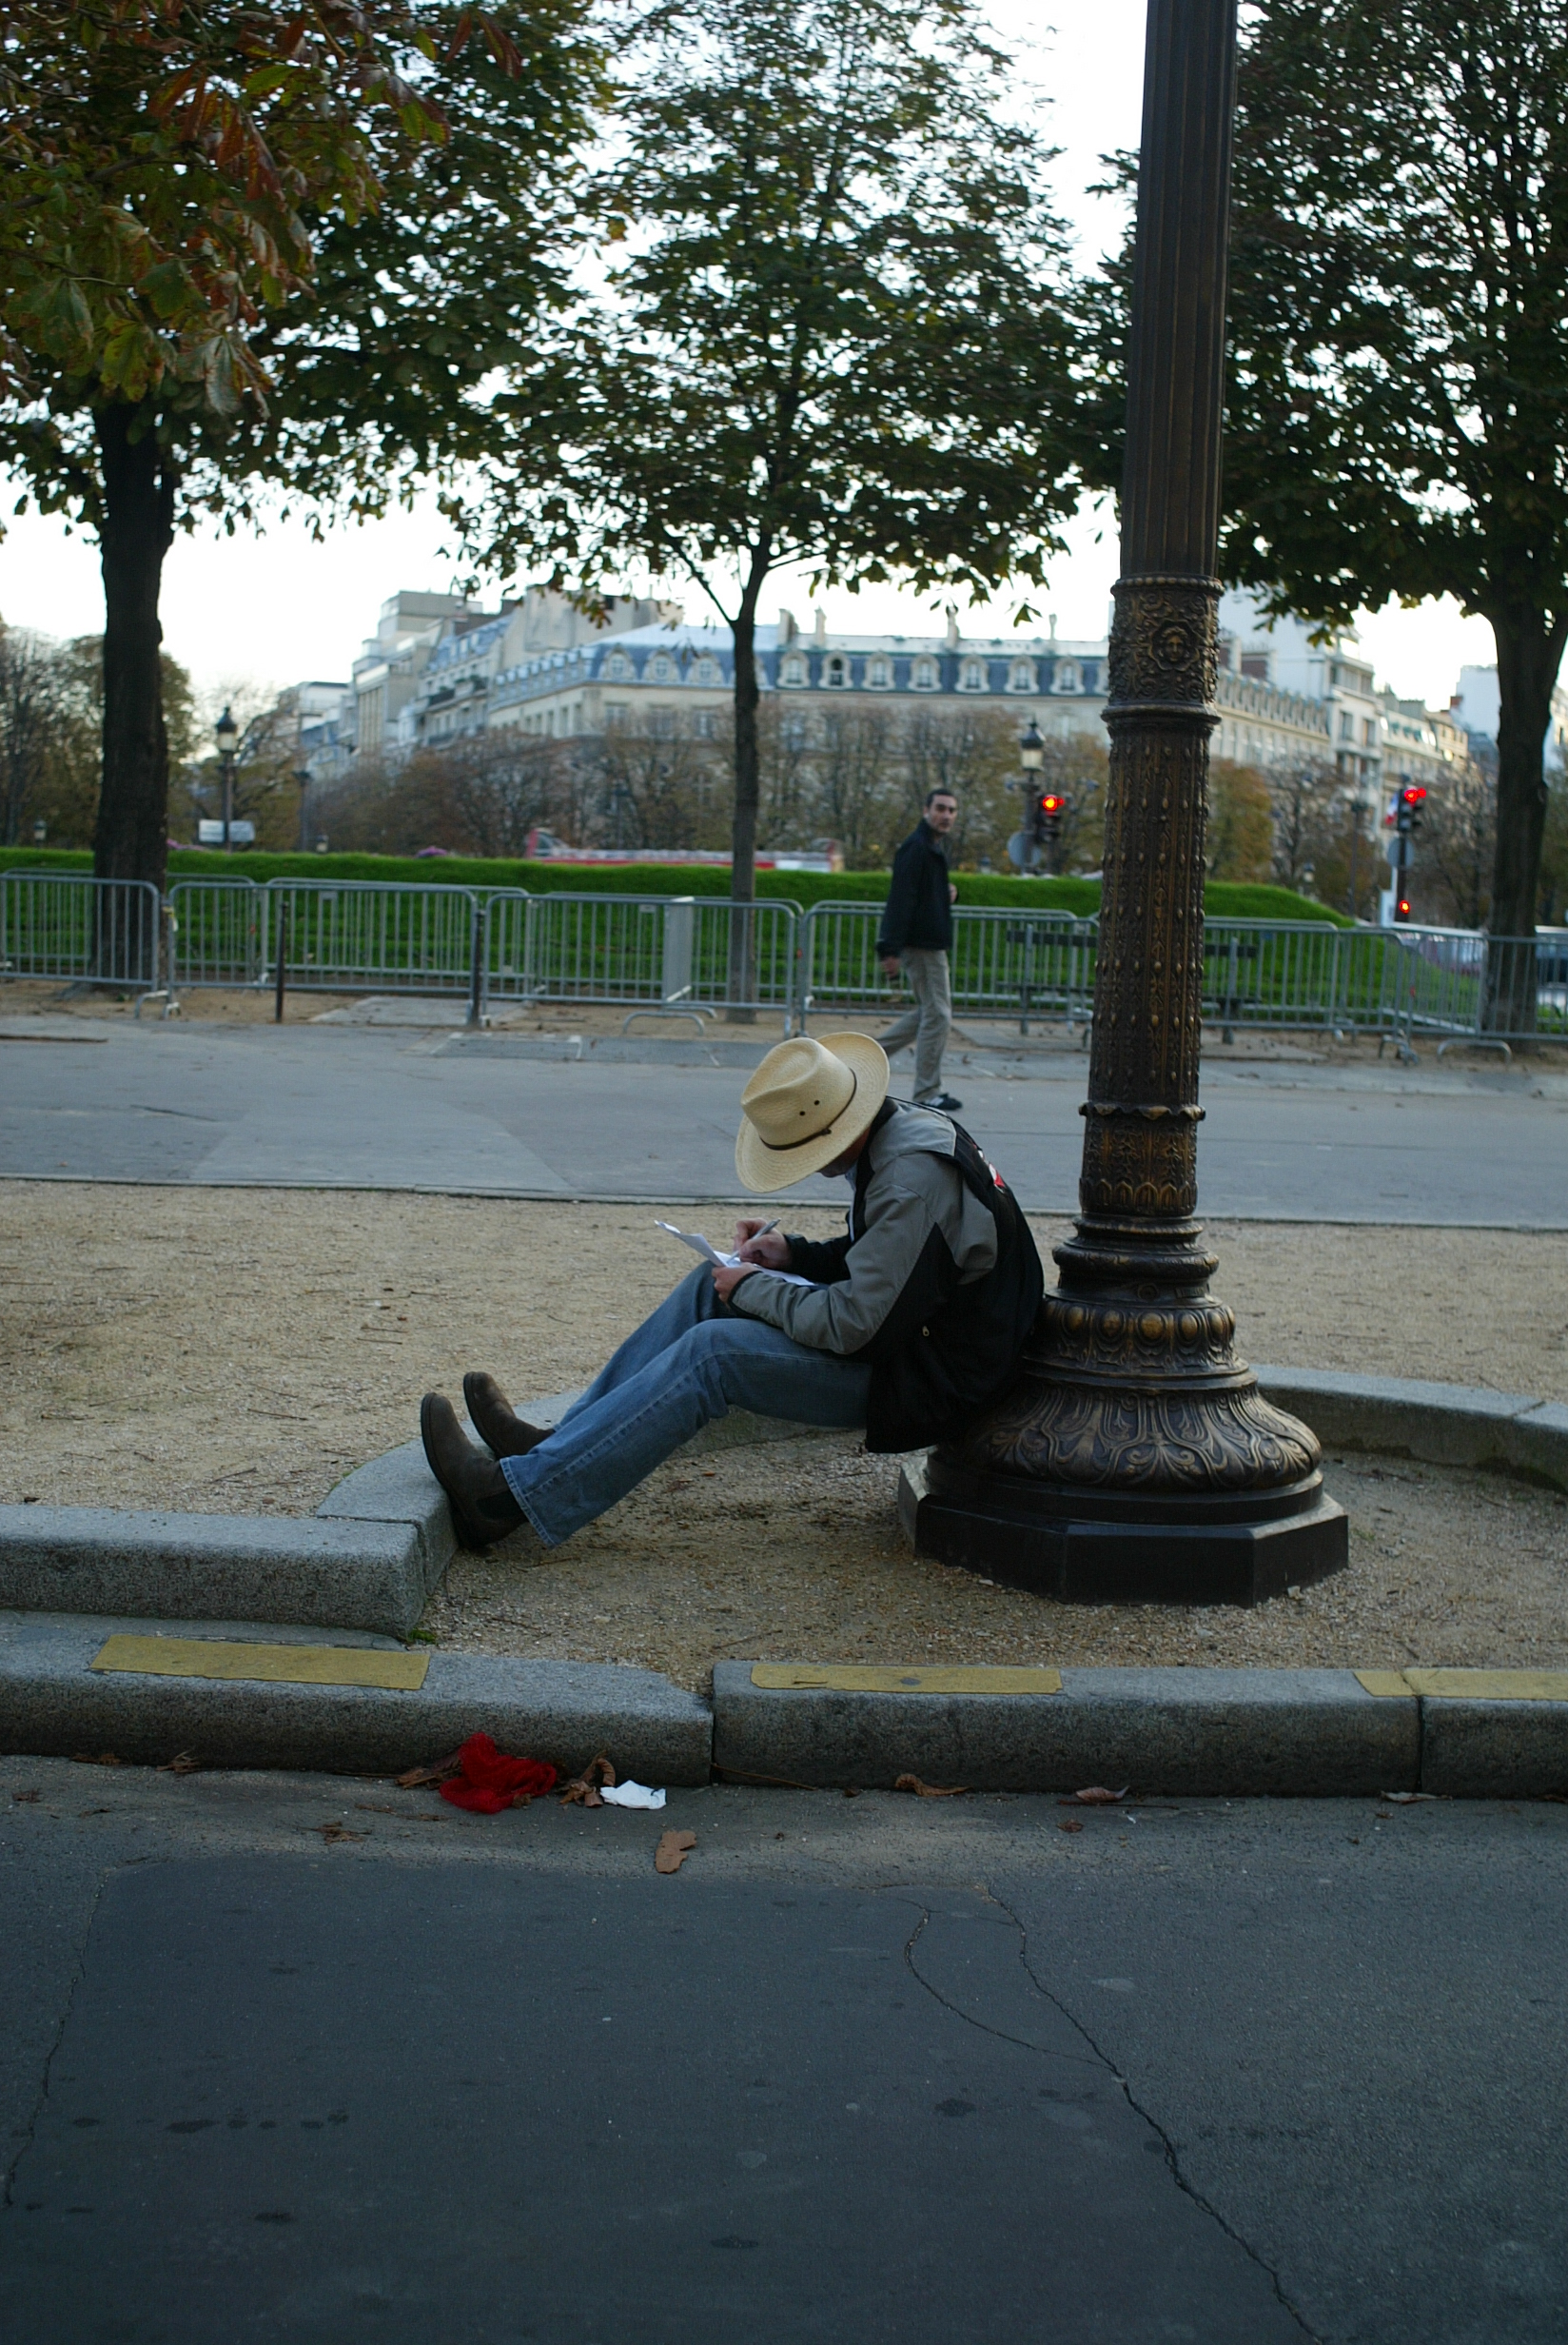 Jim works on the script for THE WRITER on the Champs Elysee, Paris.